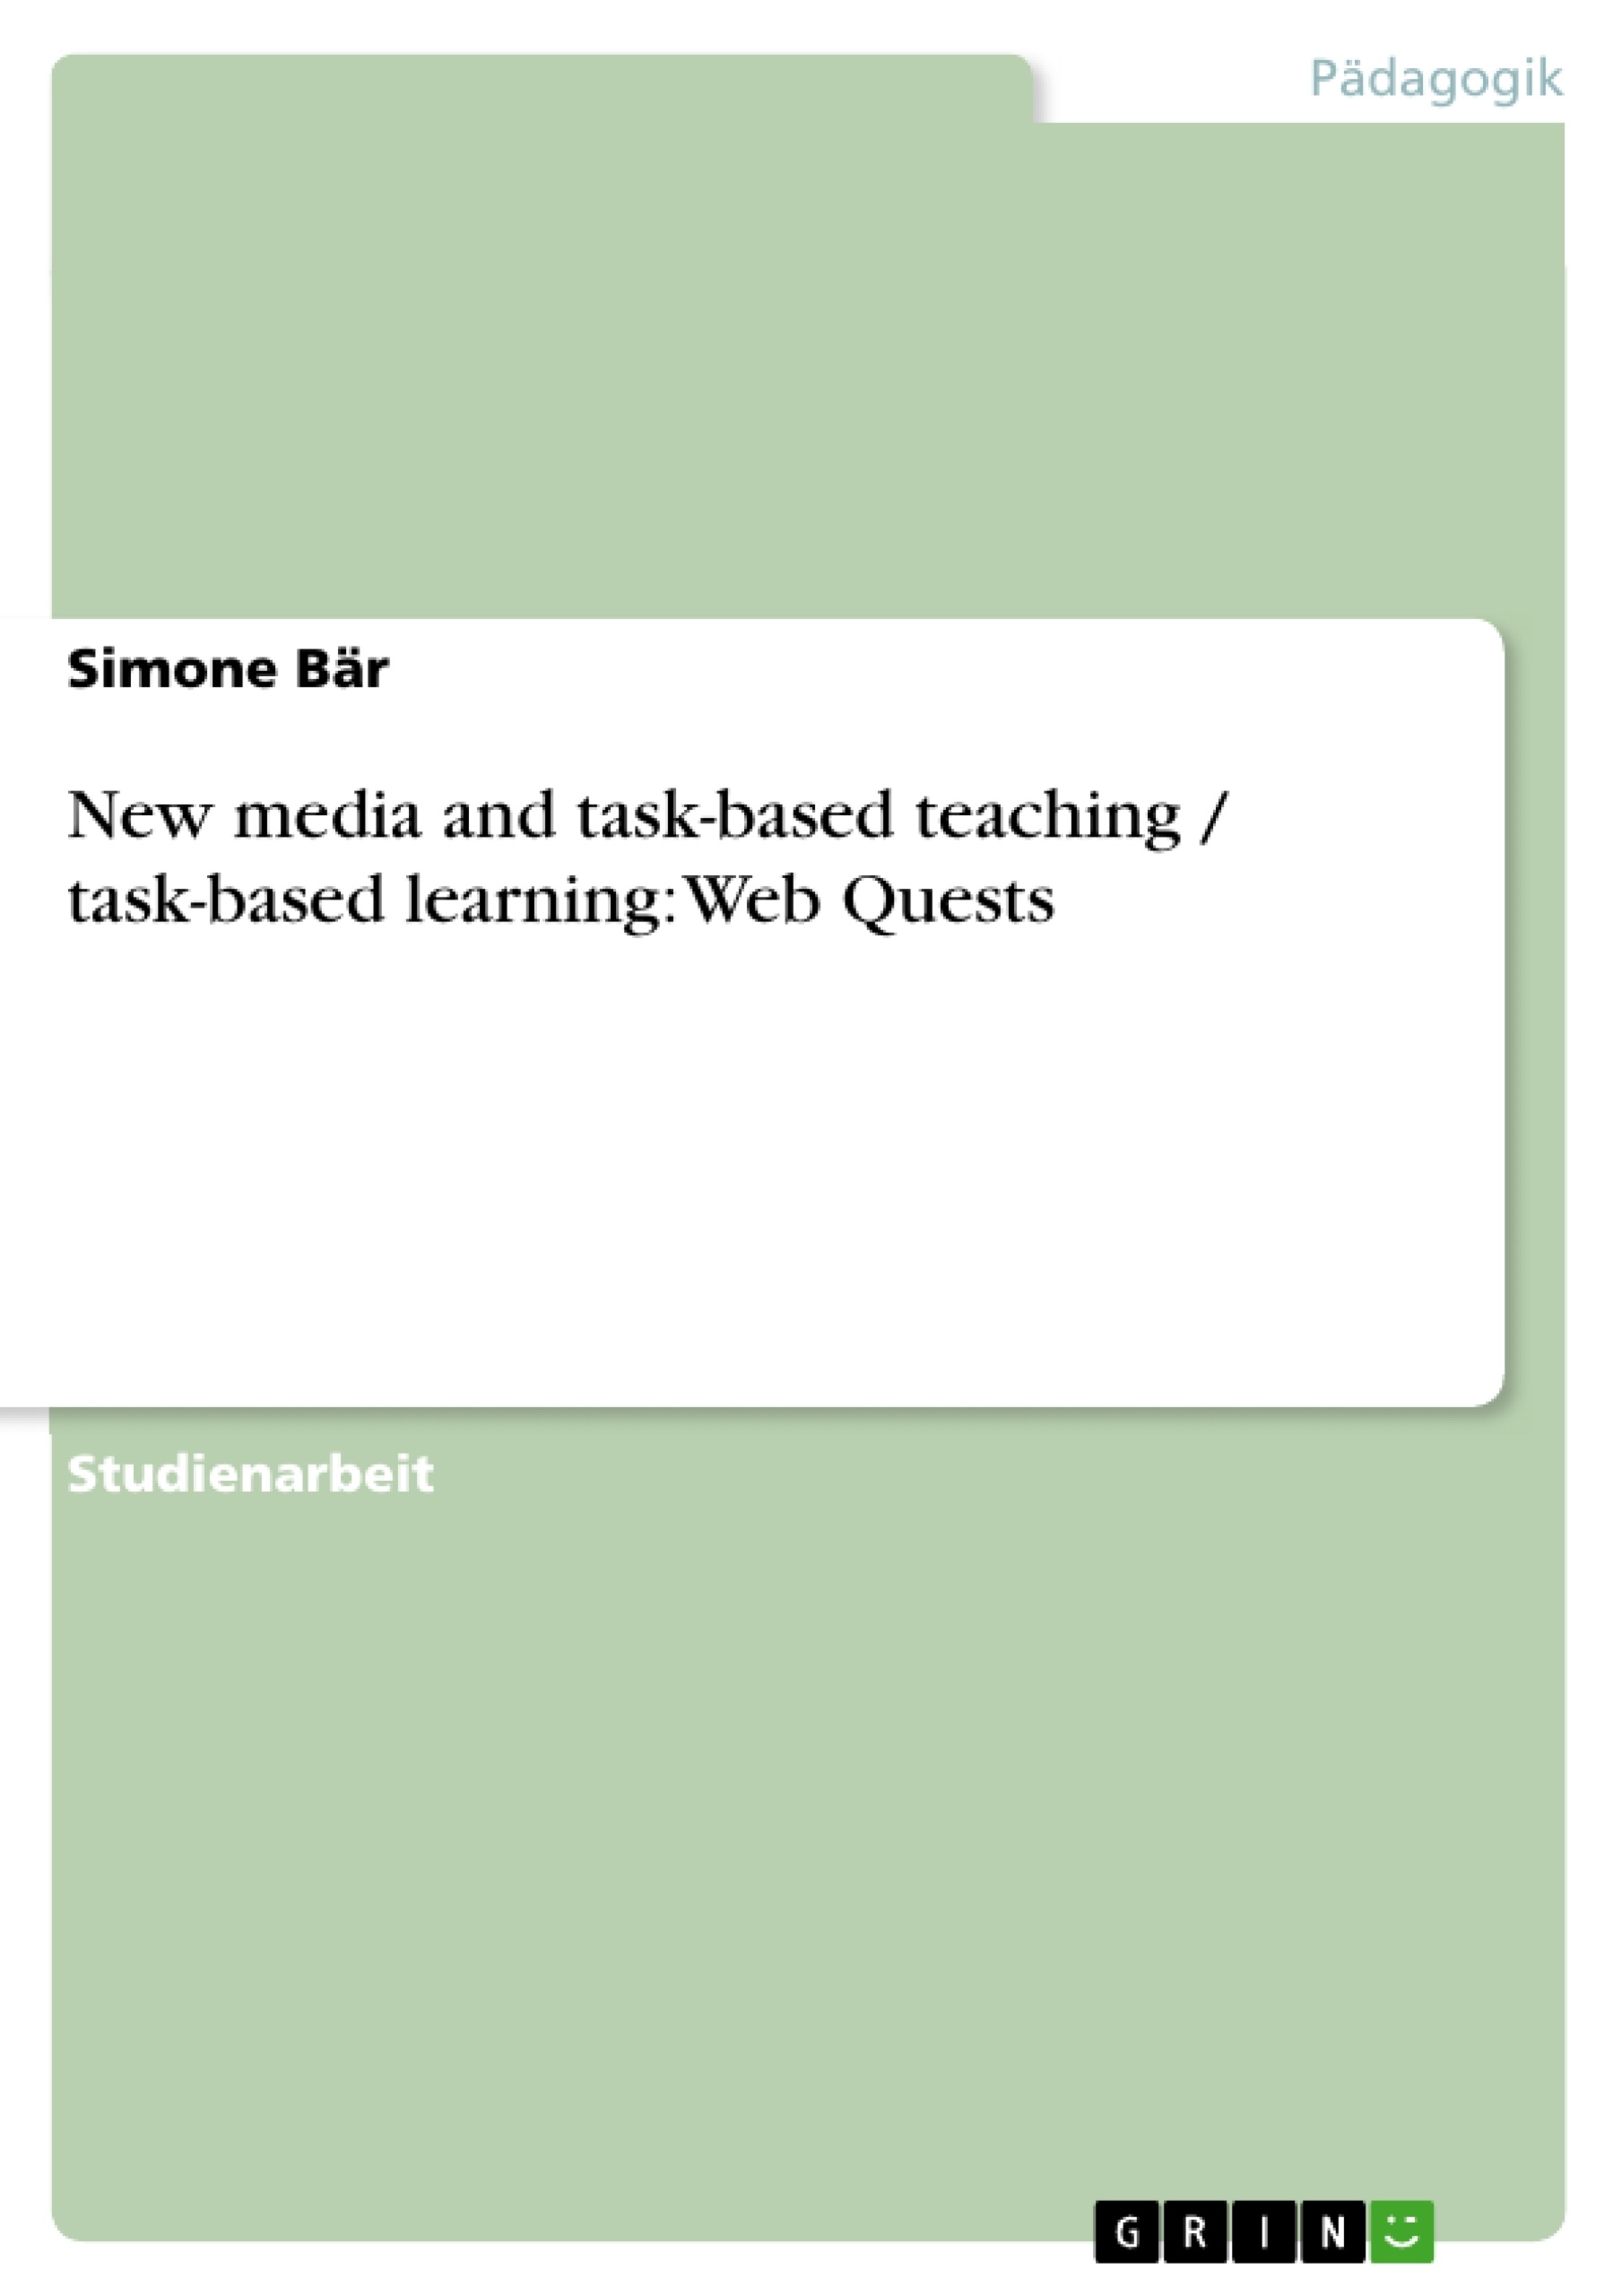 Titel: New media and task-based teaching / task-based learning: Web Quests